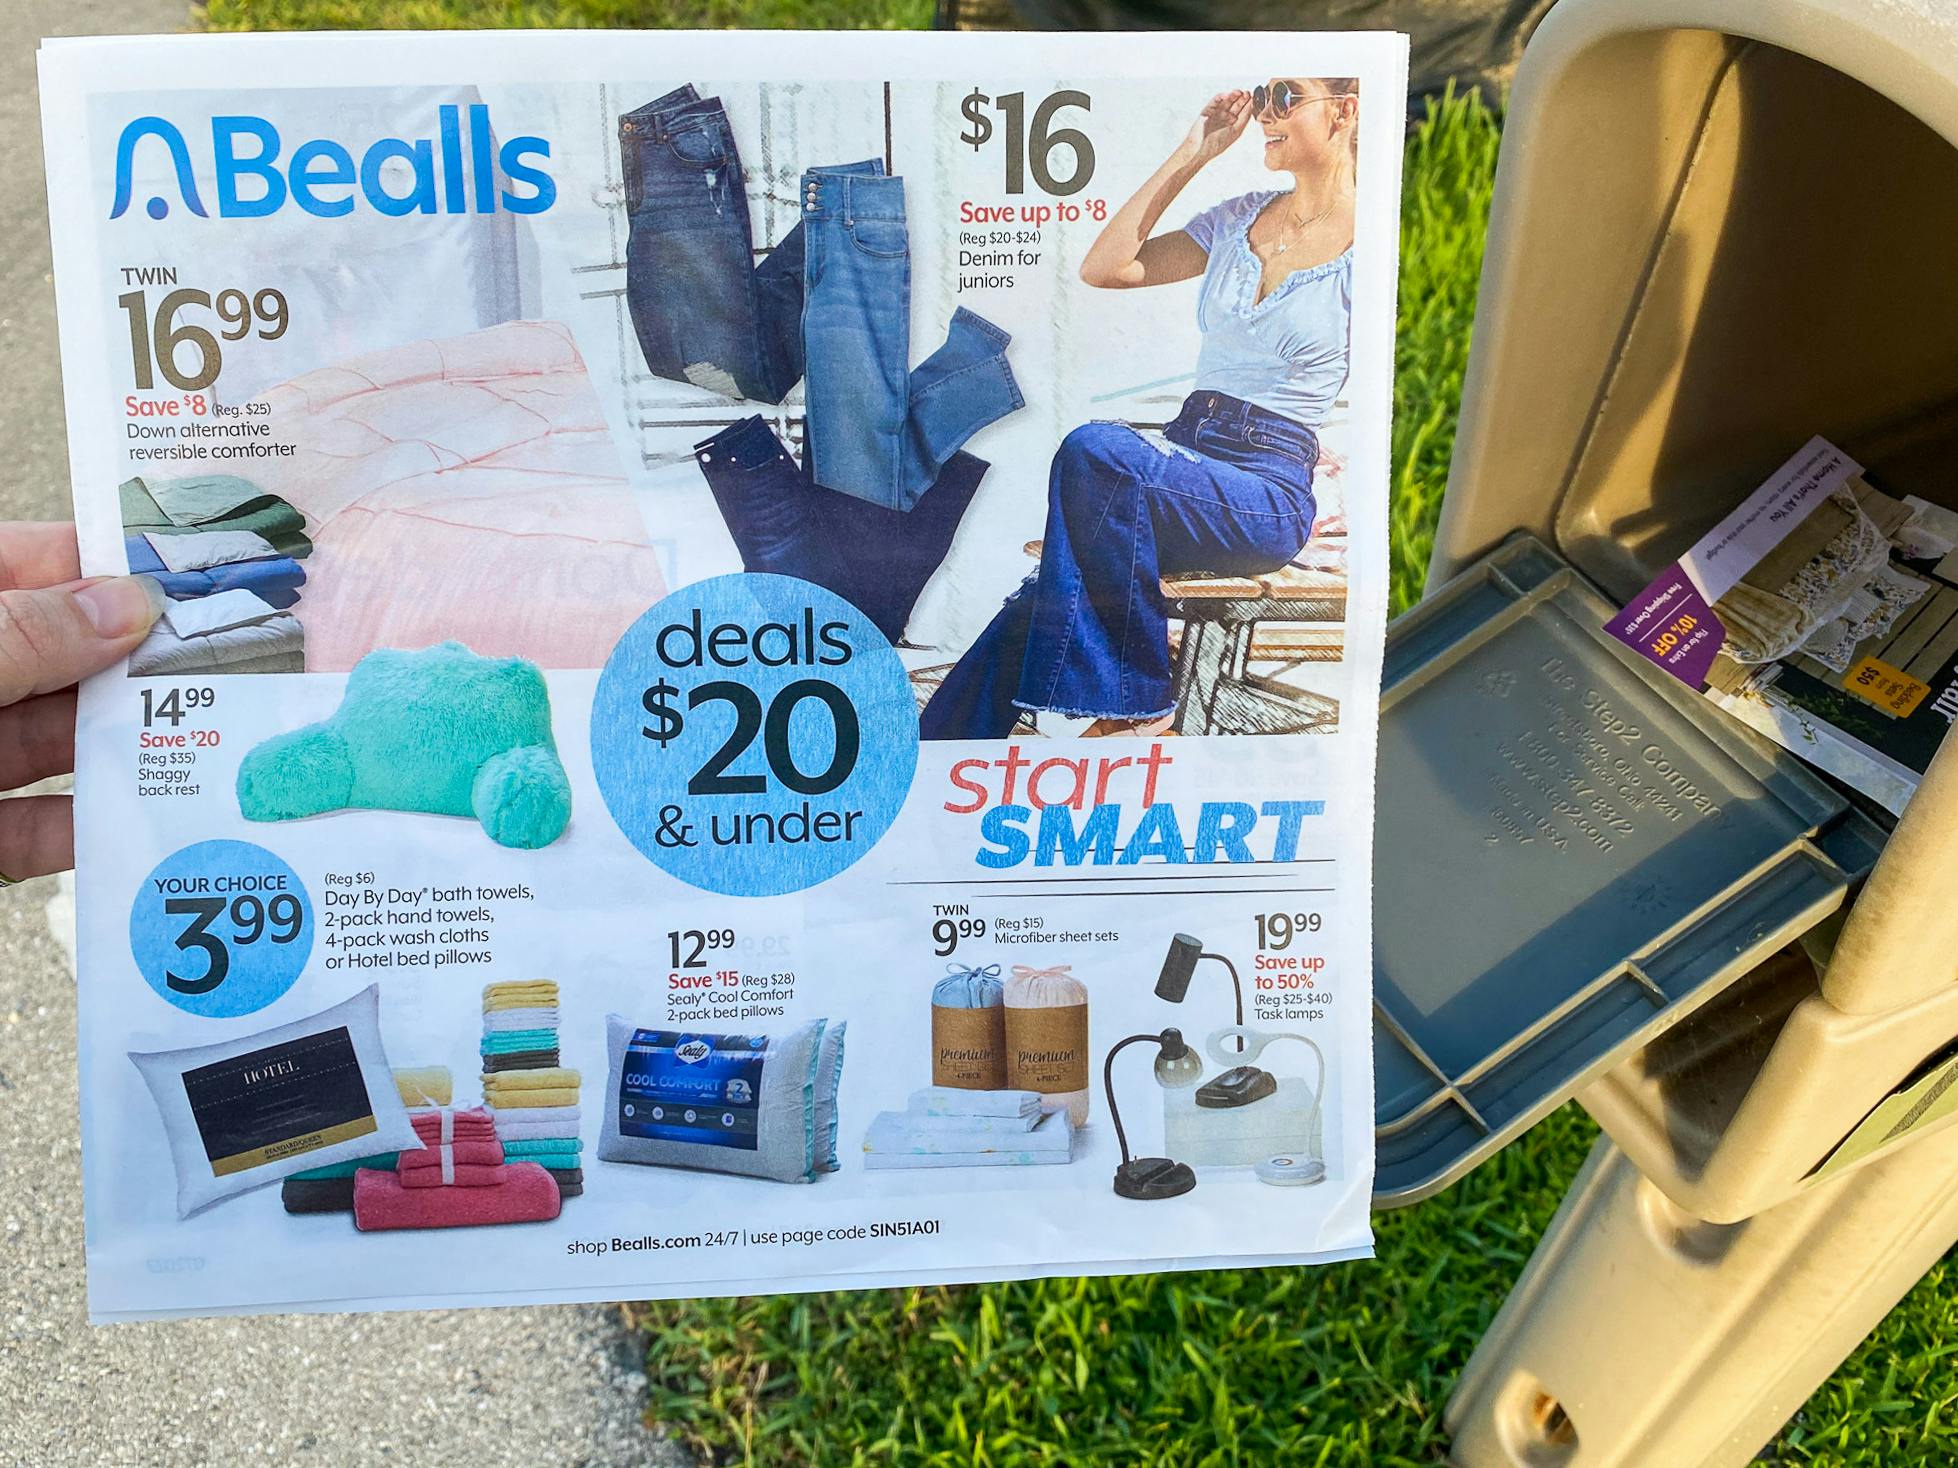 Bealls Coupon or Not — Here's How to Save The Krazy Coupon Lady